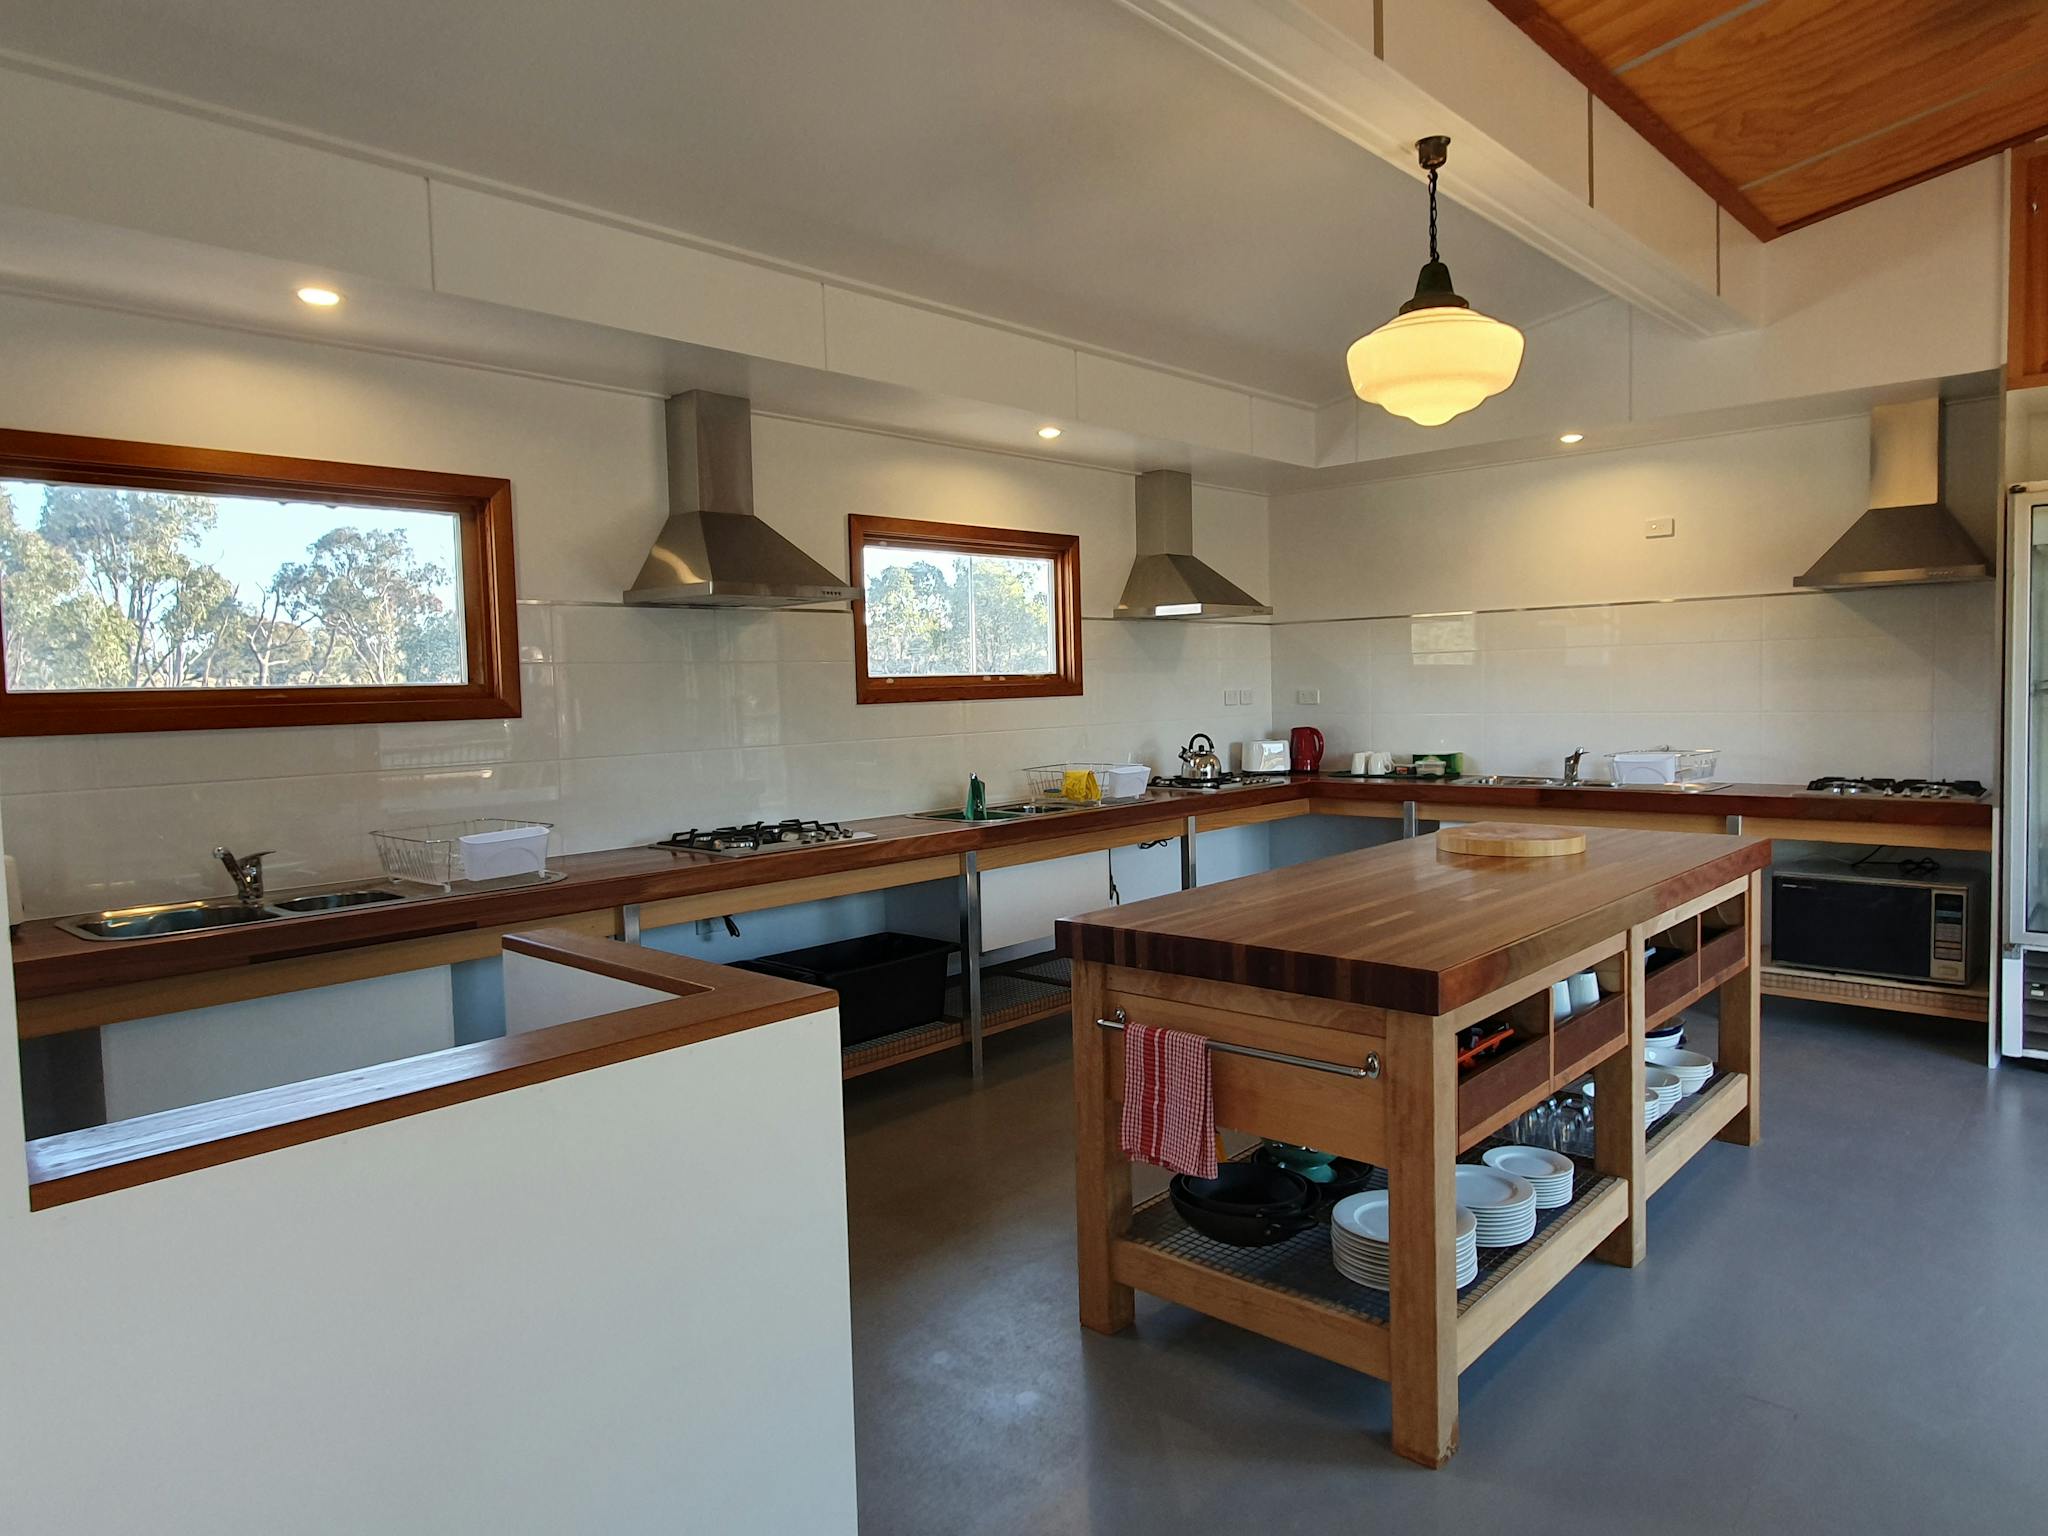 Guesthouse communal kitchen